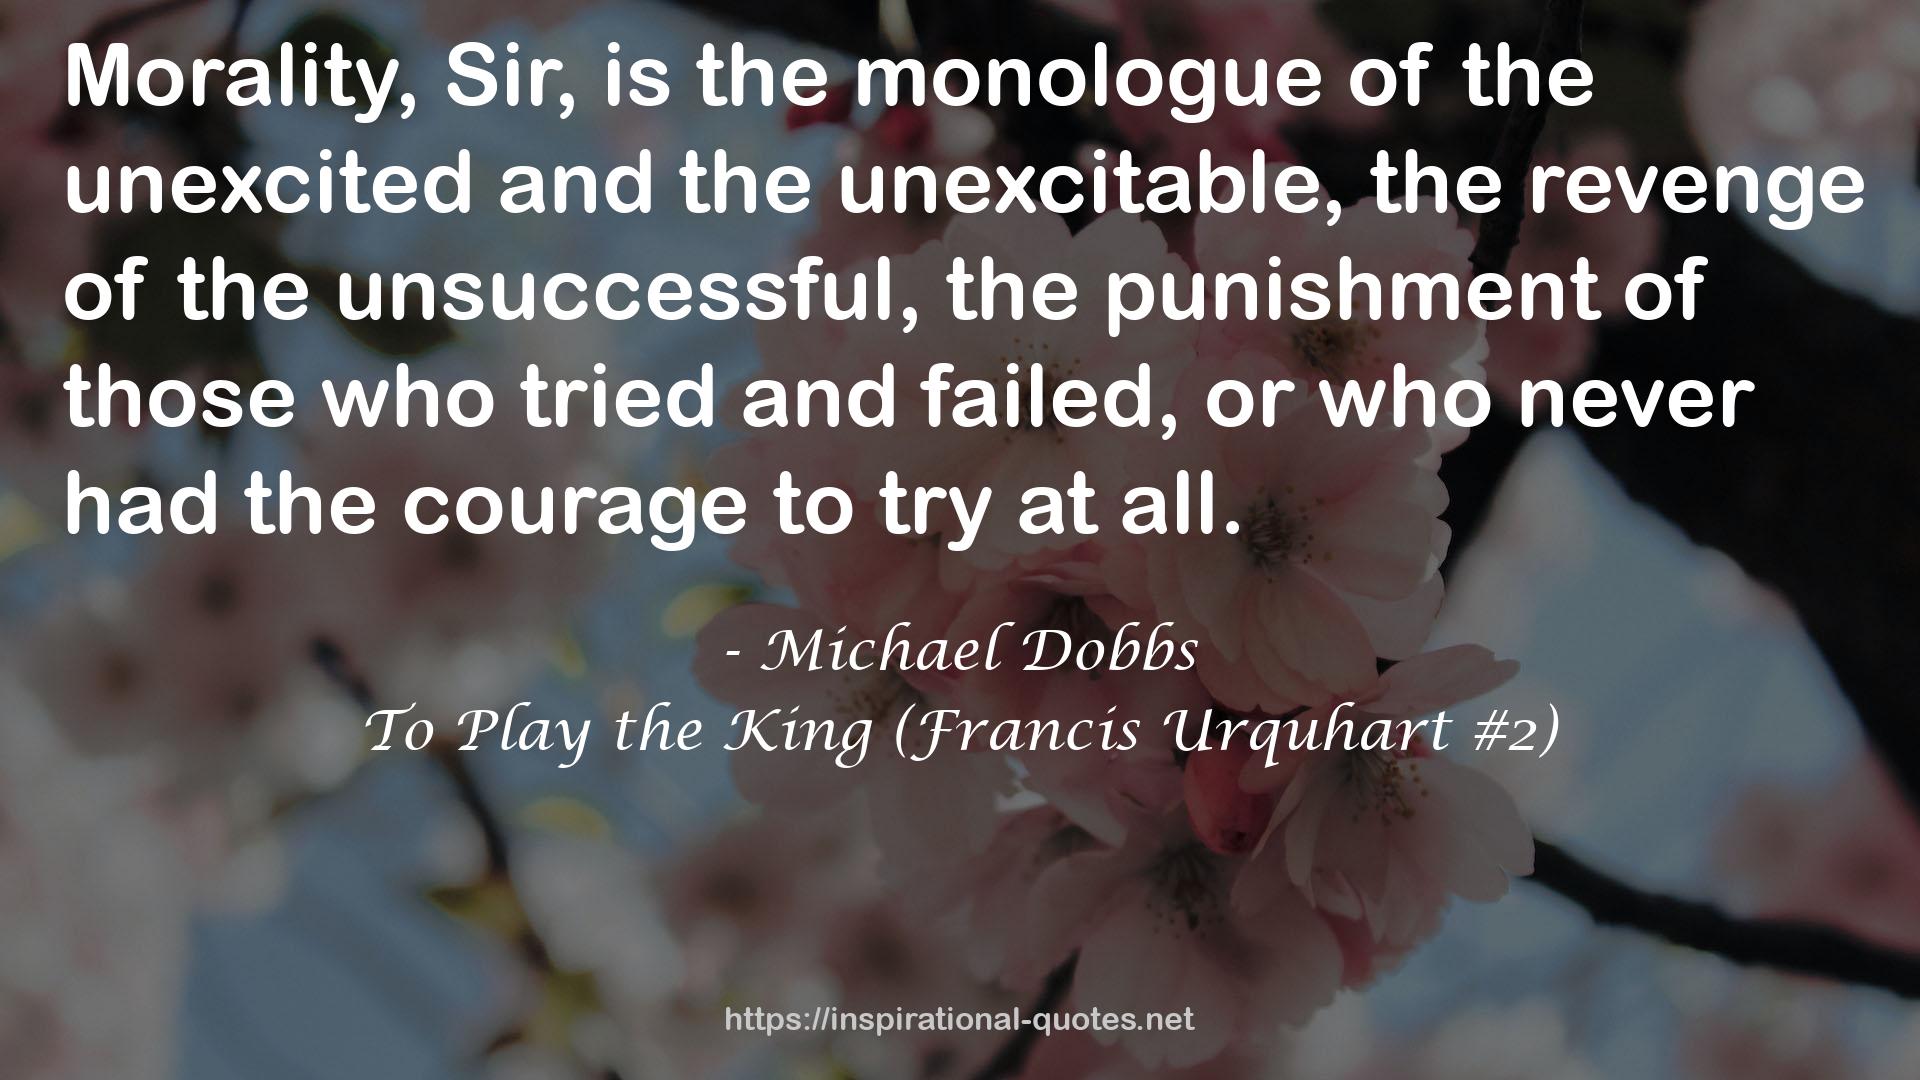 To Play the King (Francis Urquhart #2) QUOTES